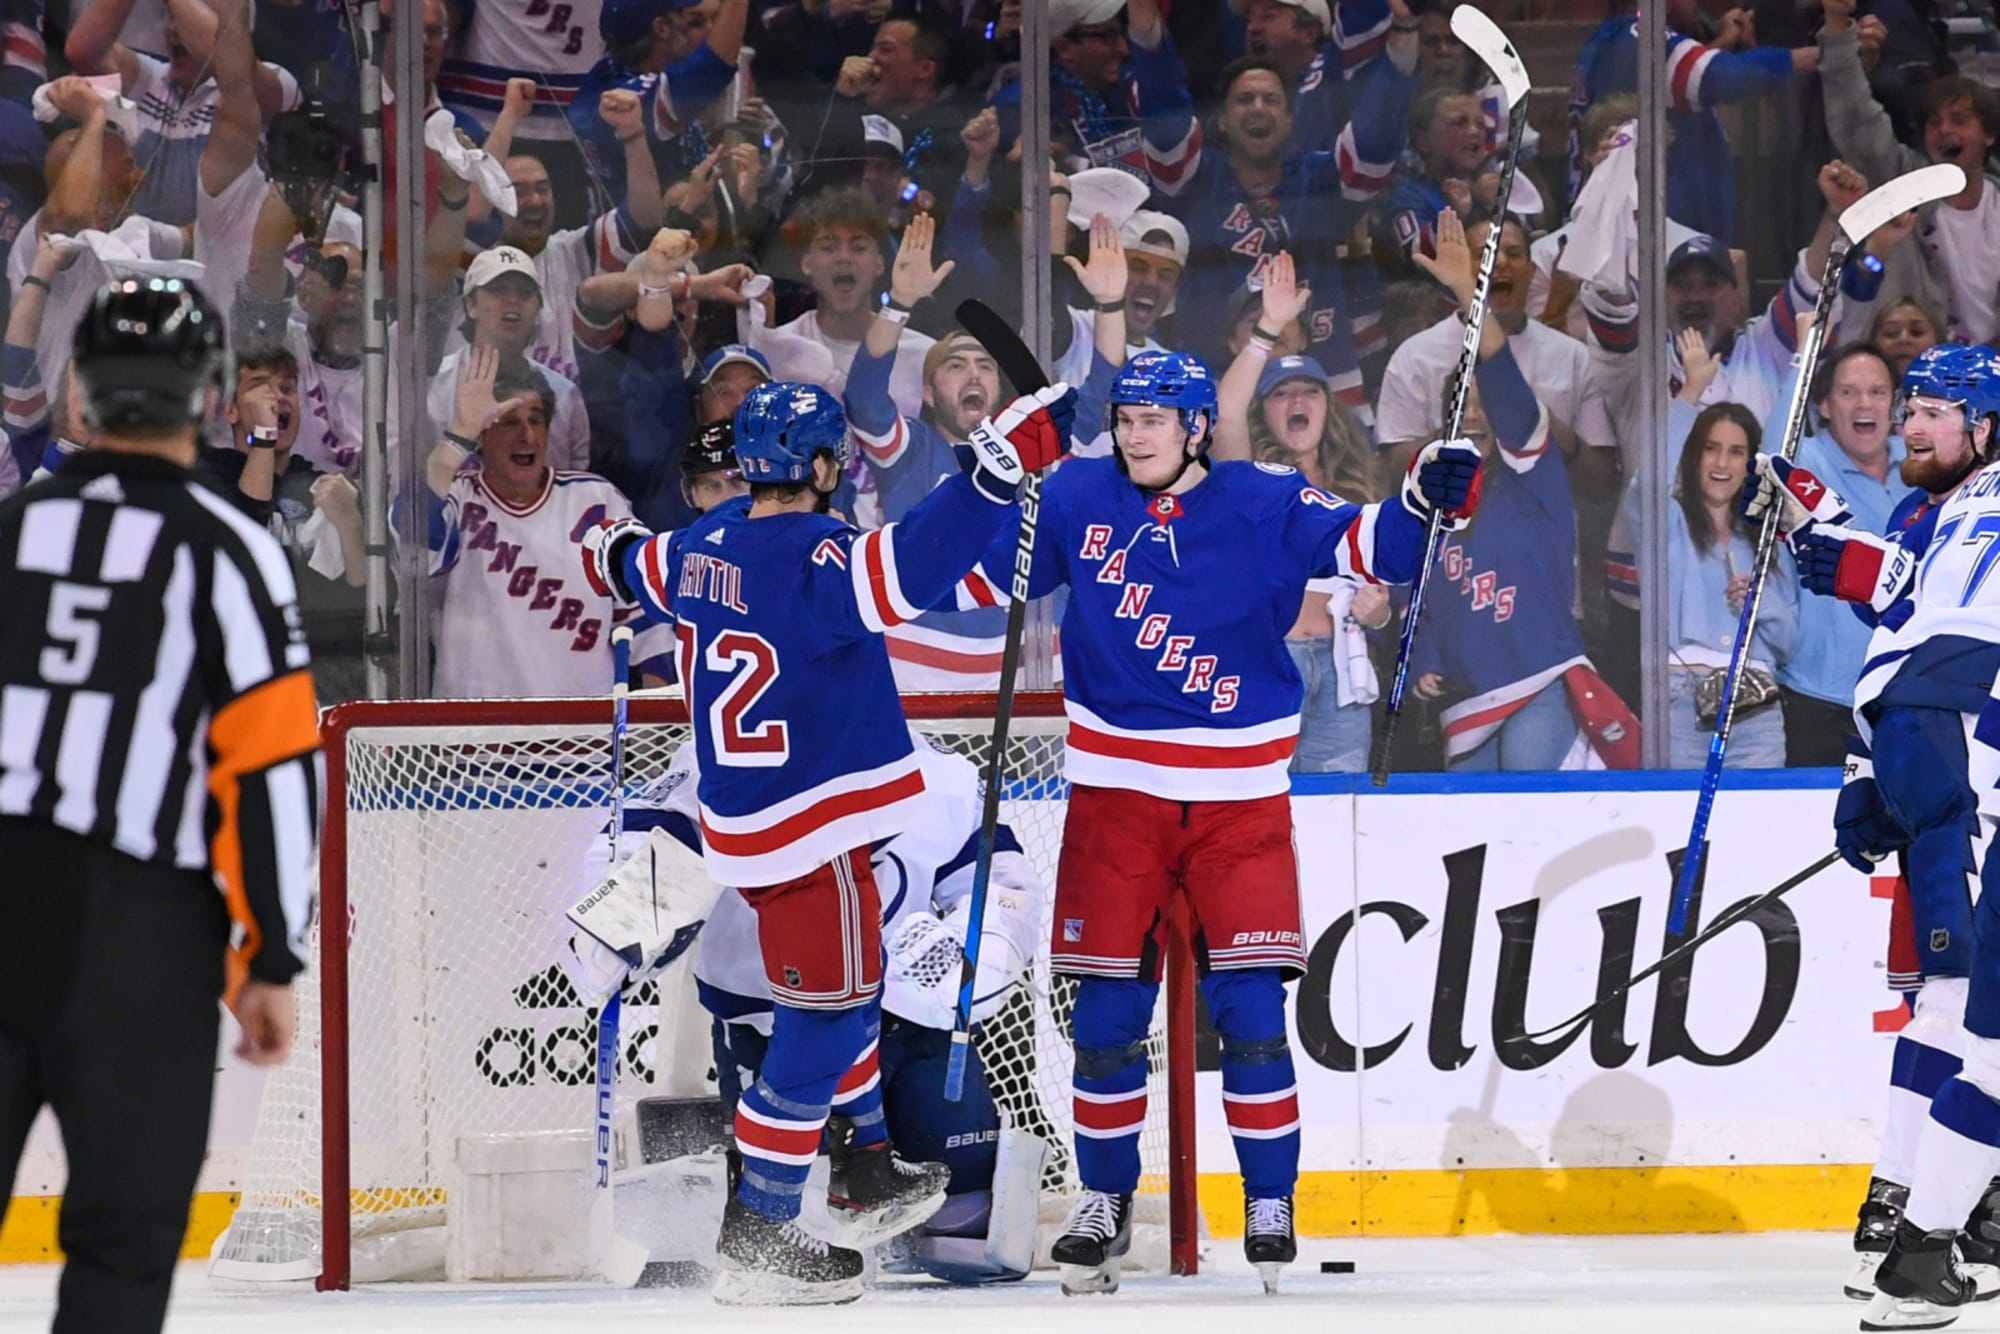 The New York Rangers undergo line changes in hopes of offensive spark